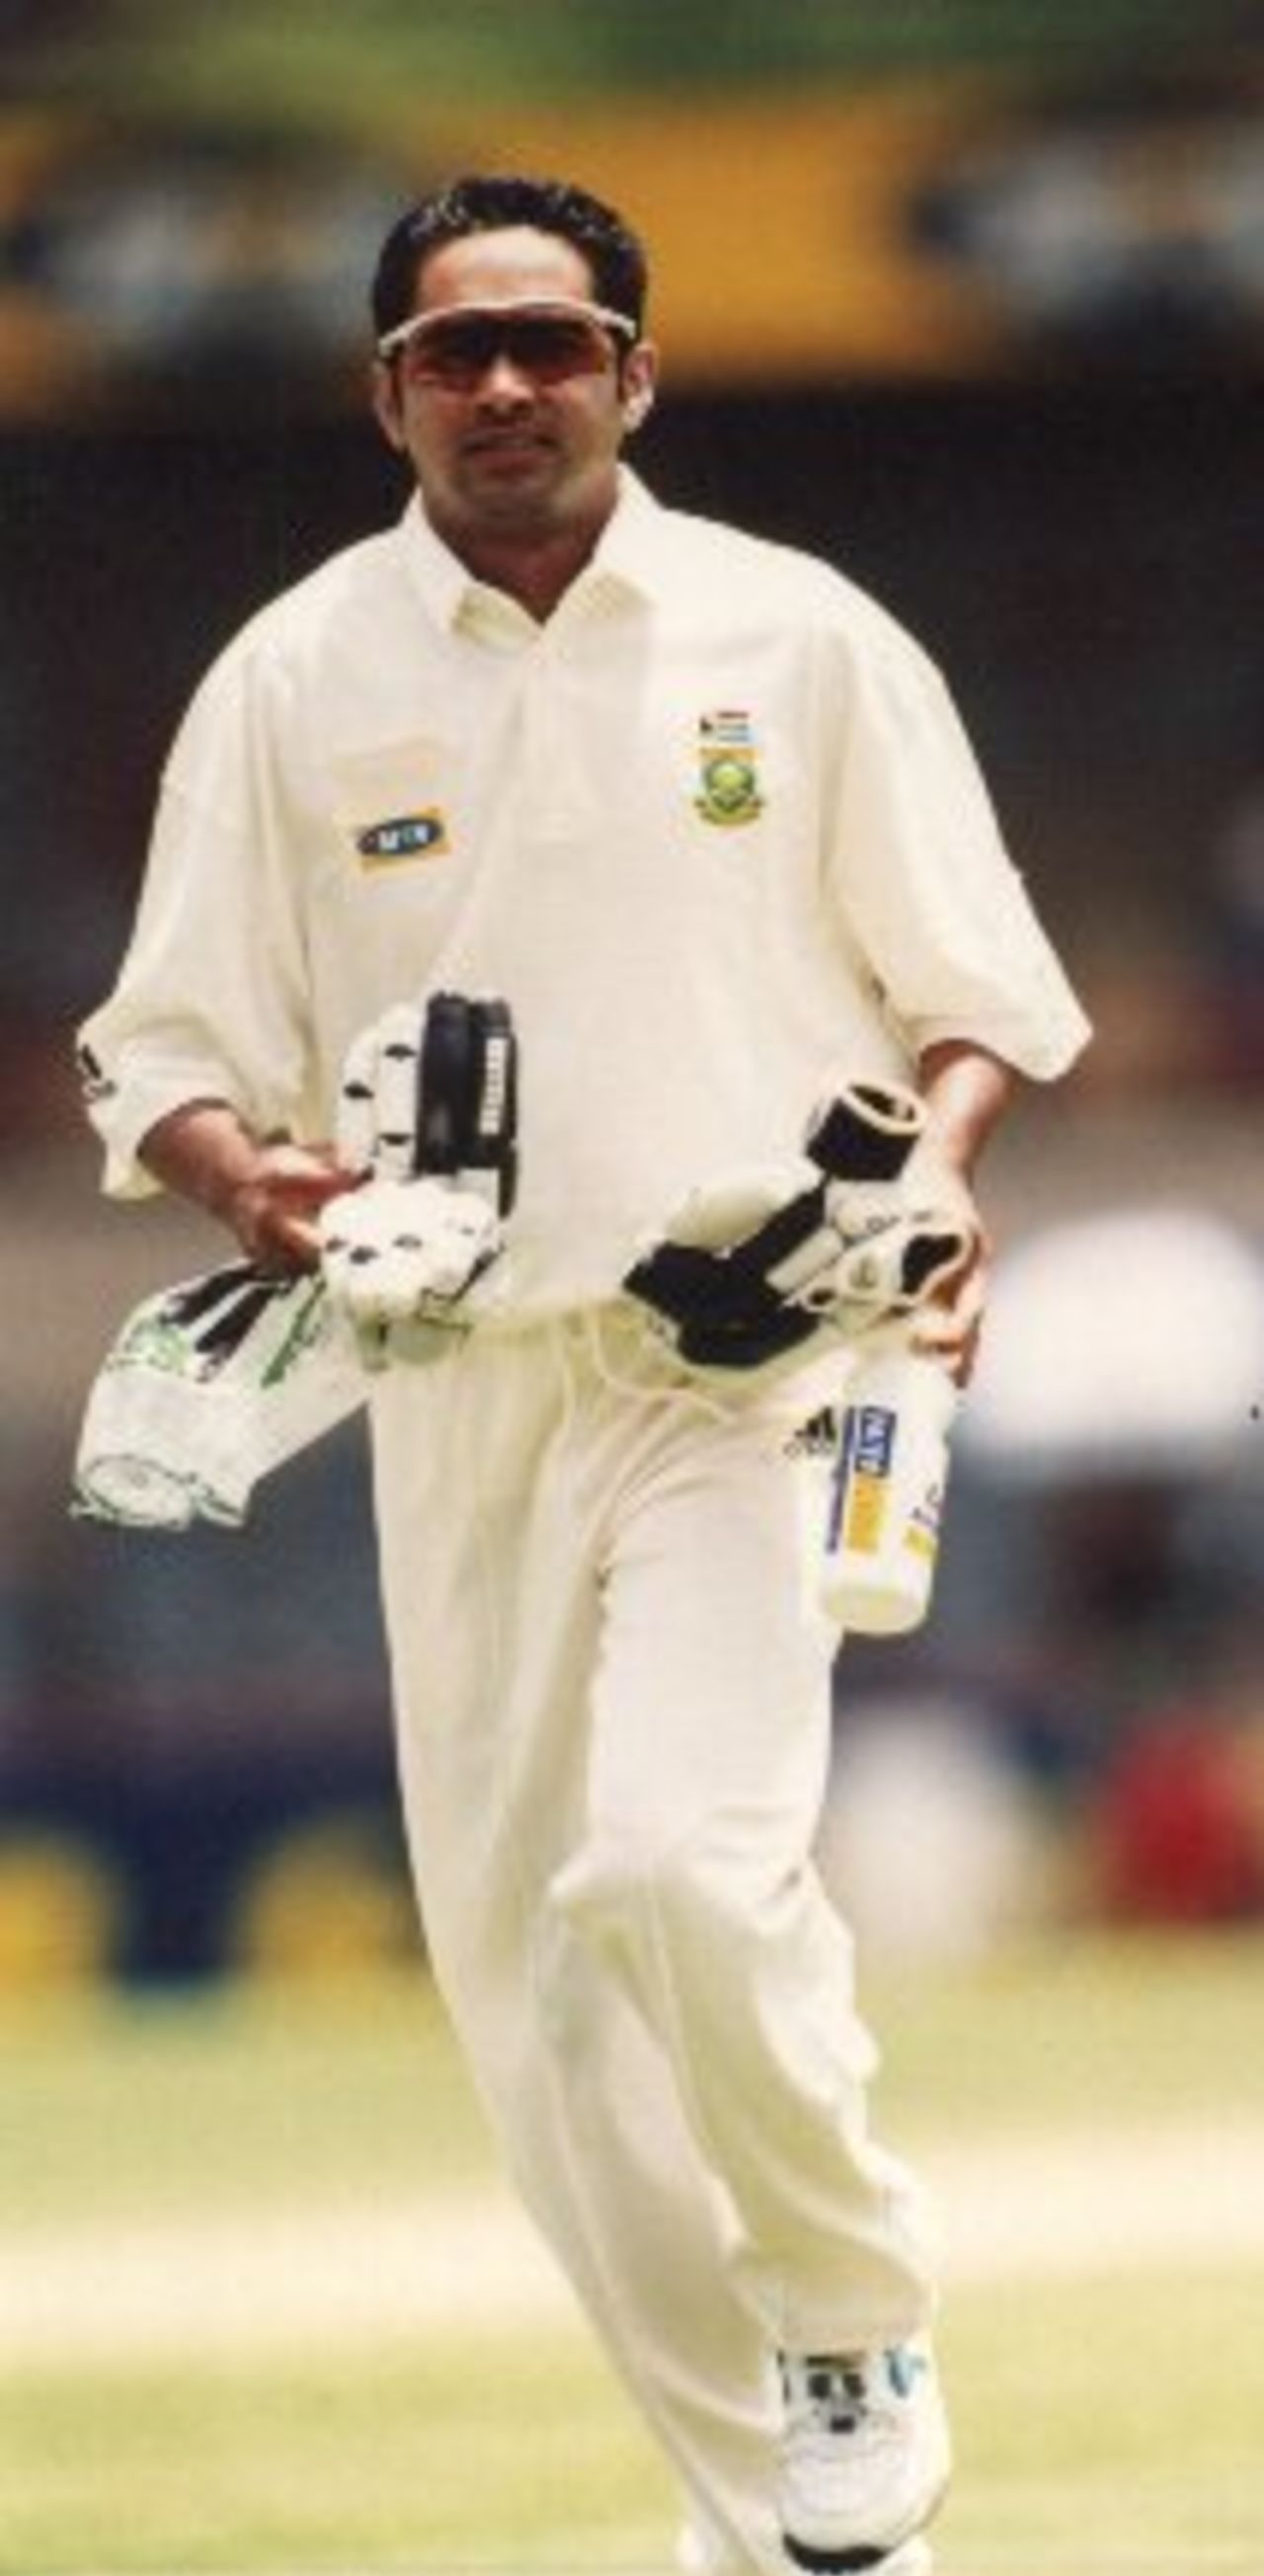 Shafiek Abrahams acts as 12th man in the 1st Test between South Africa and New Zealand Nov 2000